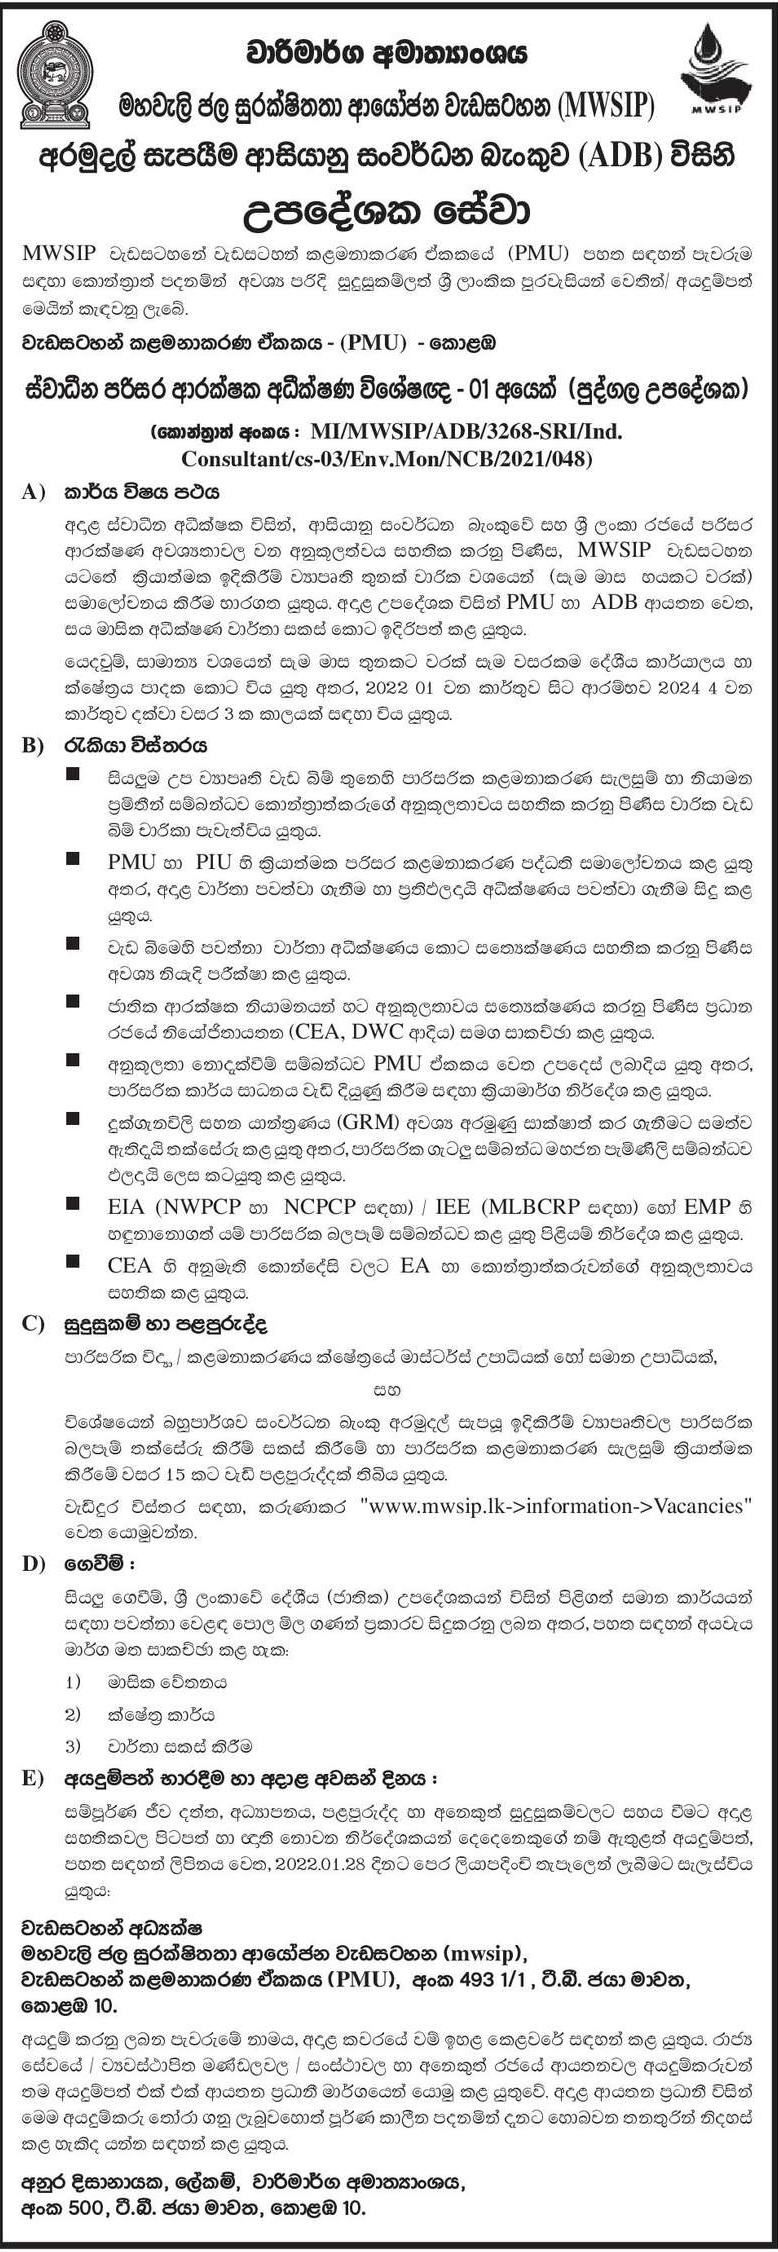 Independent Environmental Protection Monitoring Specialist - Ministry of Irrigation